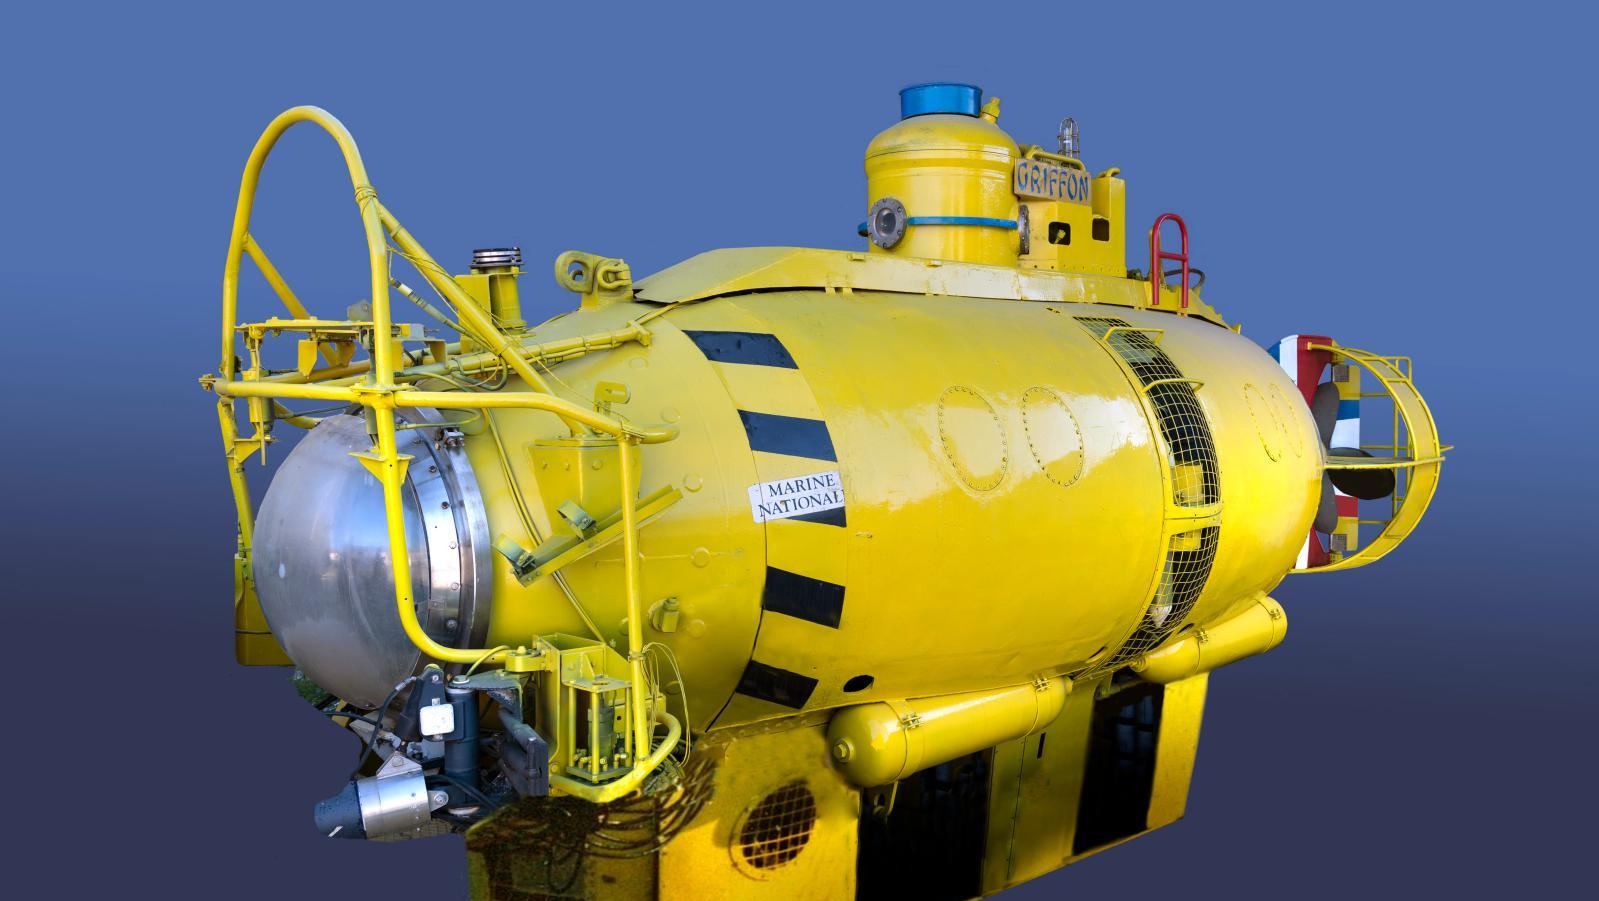 Submarine, Le Griffon, small yellow submersible, intervention submarine used for... A Pocket Submarine